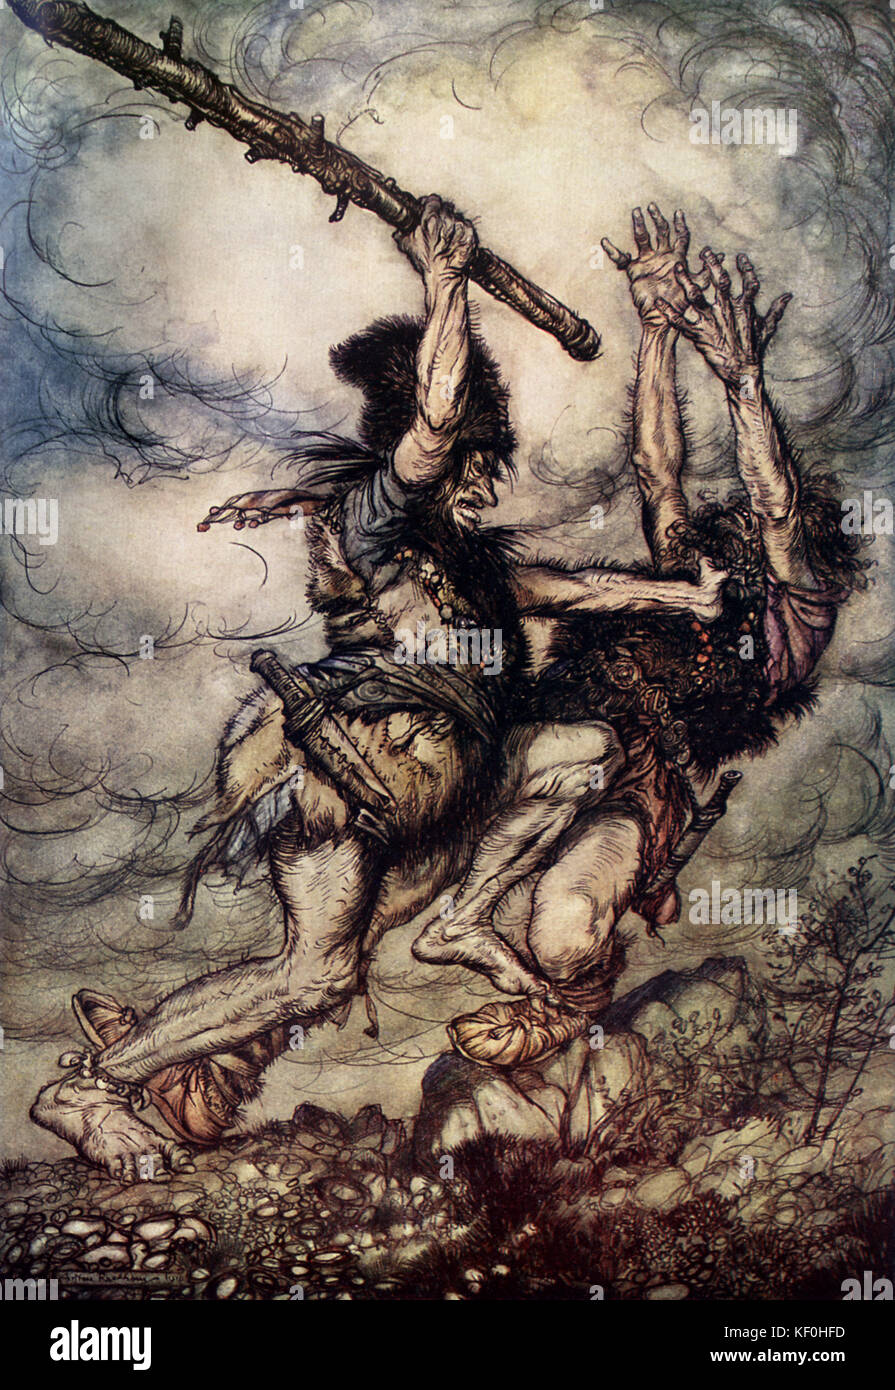 The Rhinegold / Das Rheingold by Richard Wagner. The giant Fafner murders  his brother Fasolt. Illustration by Arthur Rackham 1867 - 1939. Caption:  'Fafner kills Fasolt' Scene 4. From 'The Ring Cycle' / '